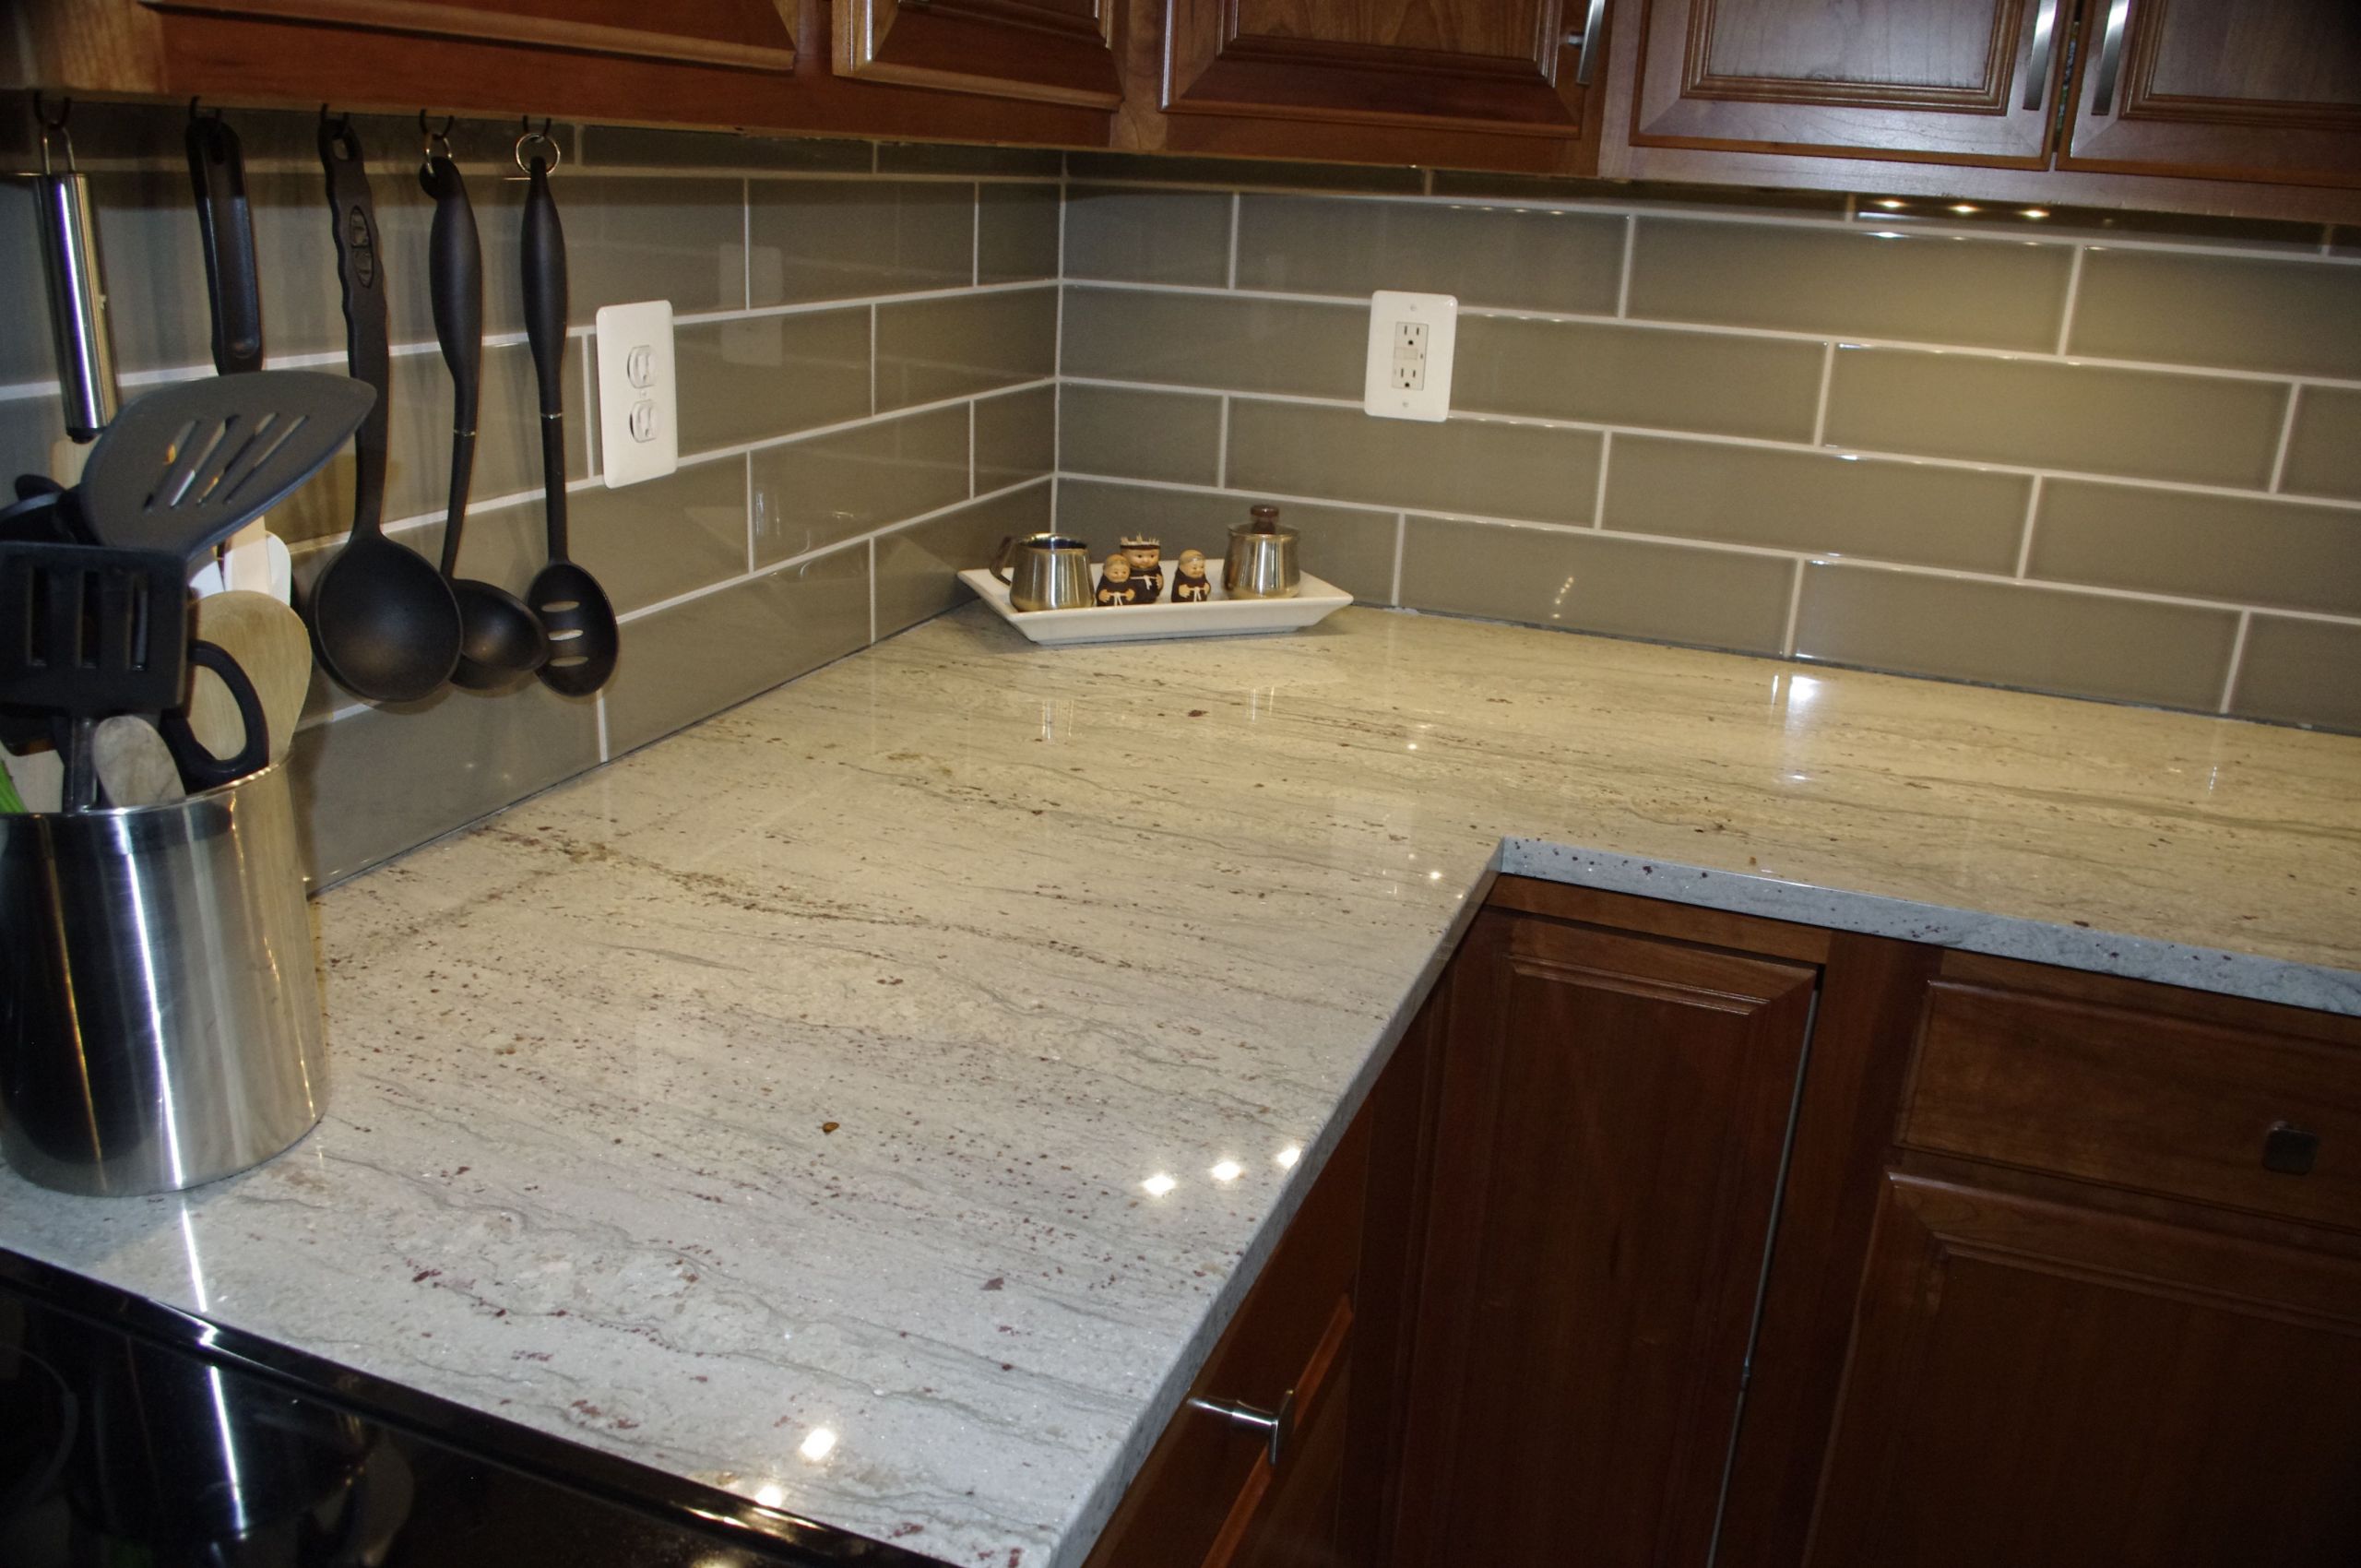 Home Depot Kitchen Countertops
 River white Granite from Countertop Solutions in